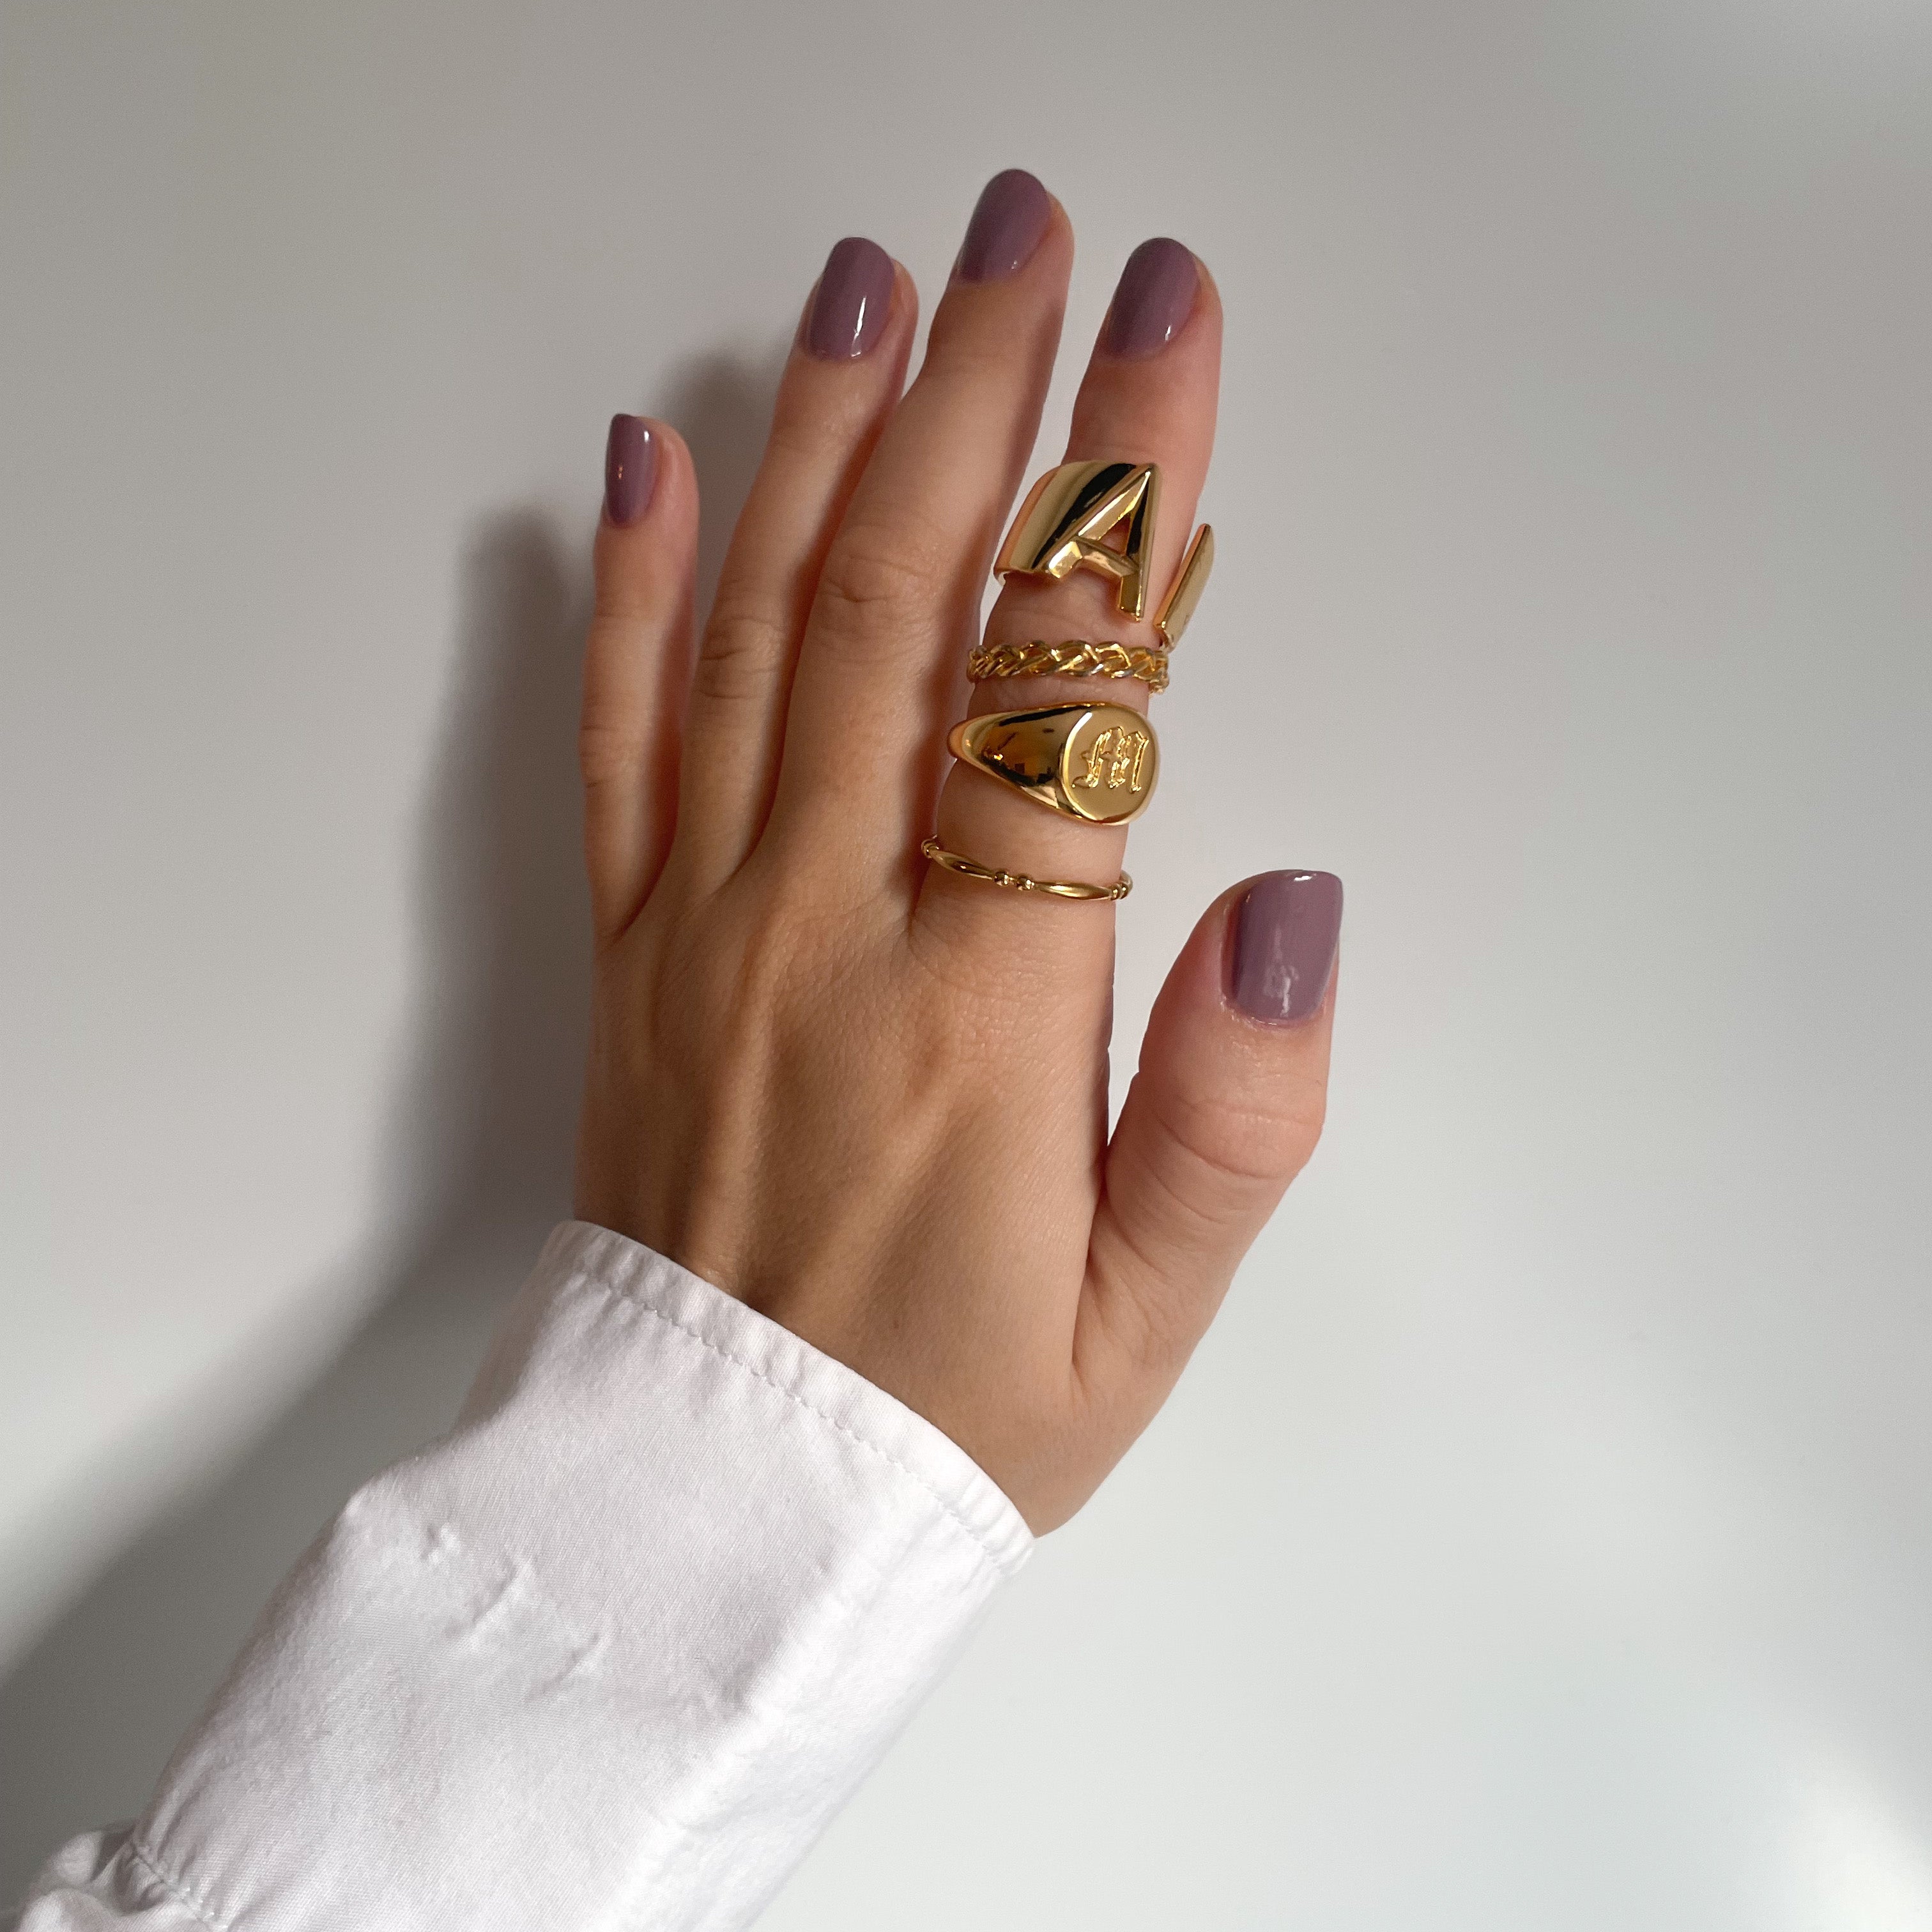 Initial ring | signet ring with initial